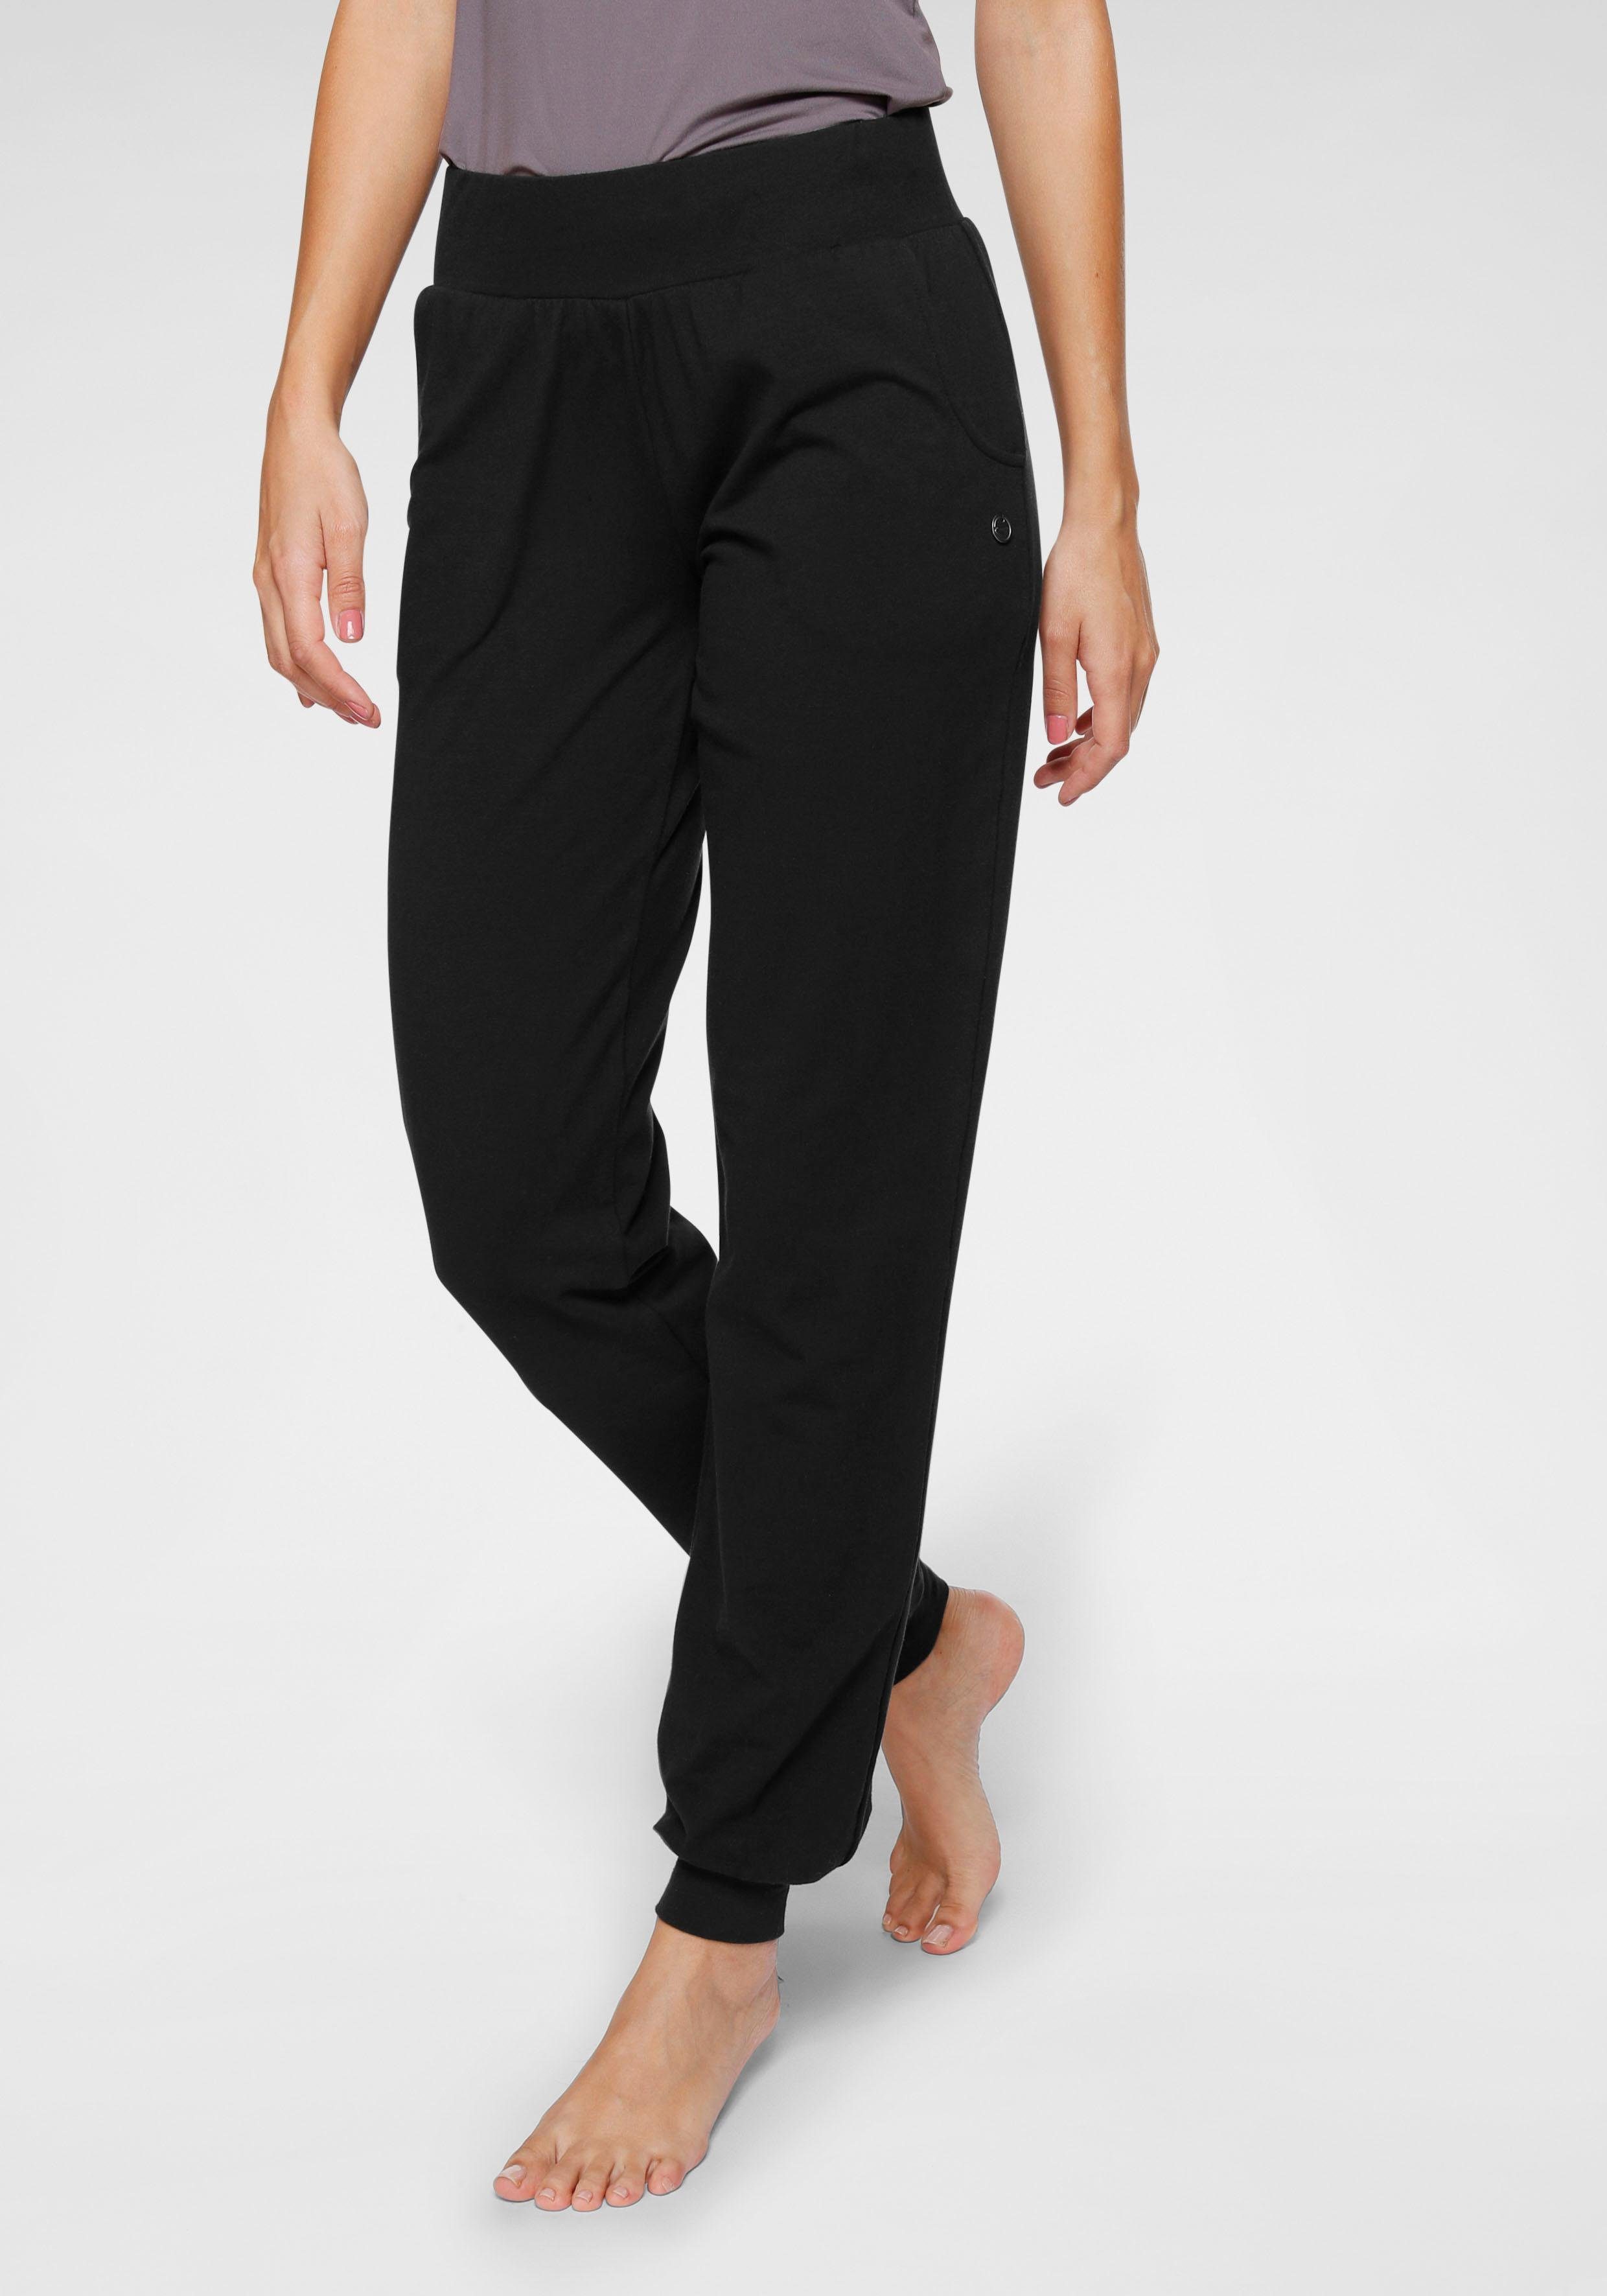 Soulwear - Yoga & Relax Pants - Loose Fit